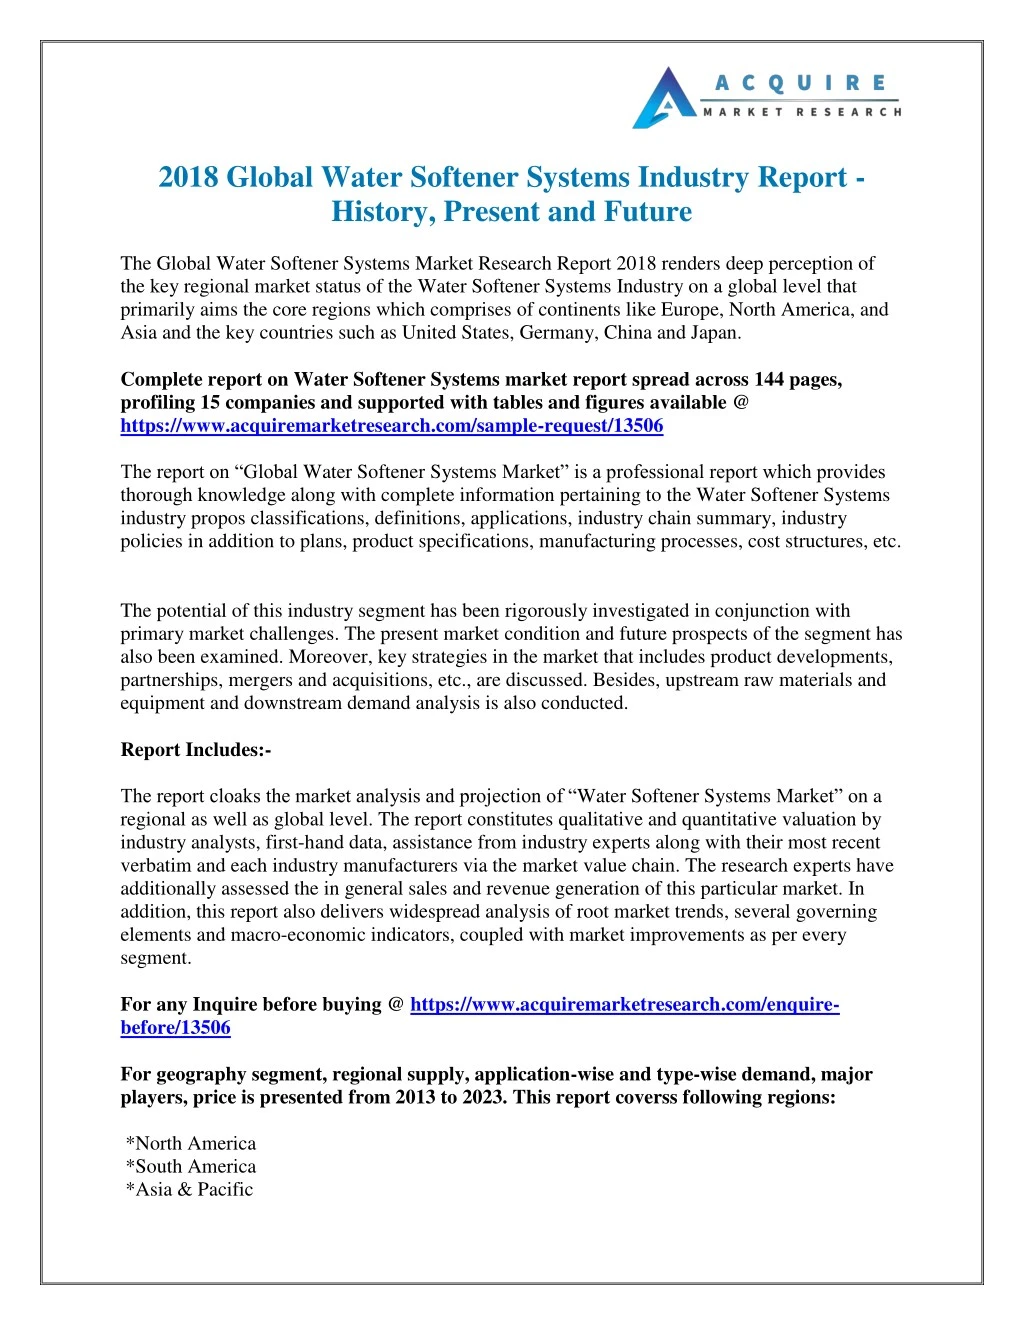 2018 global water softener systems industry